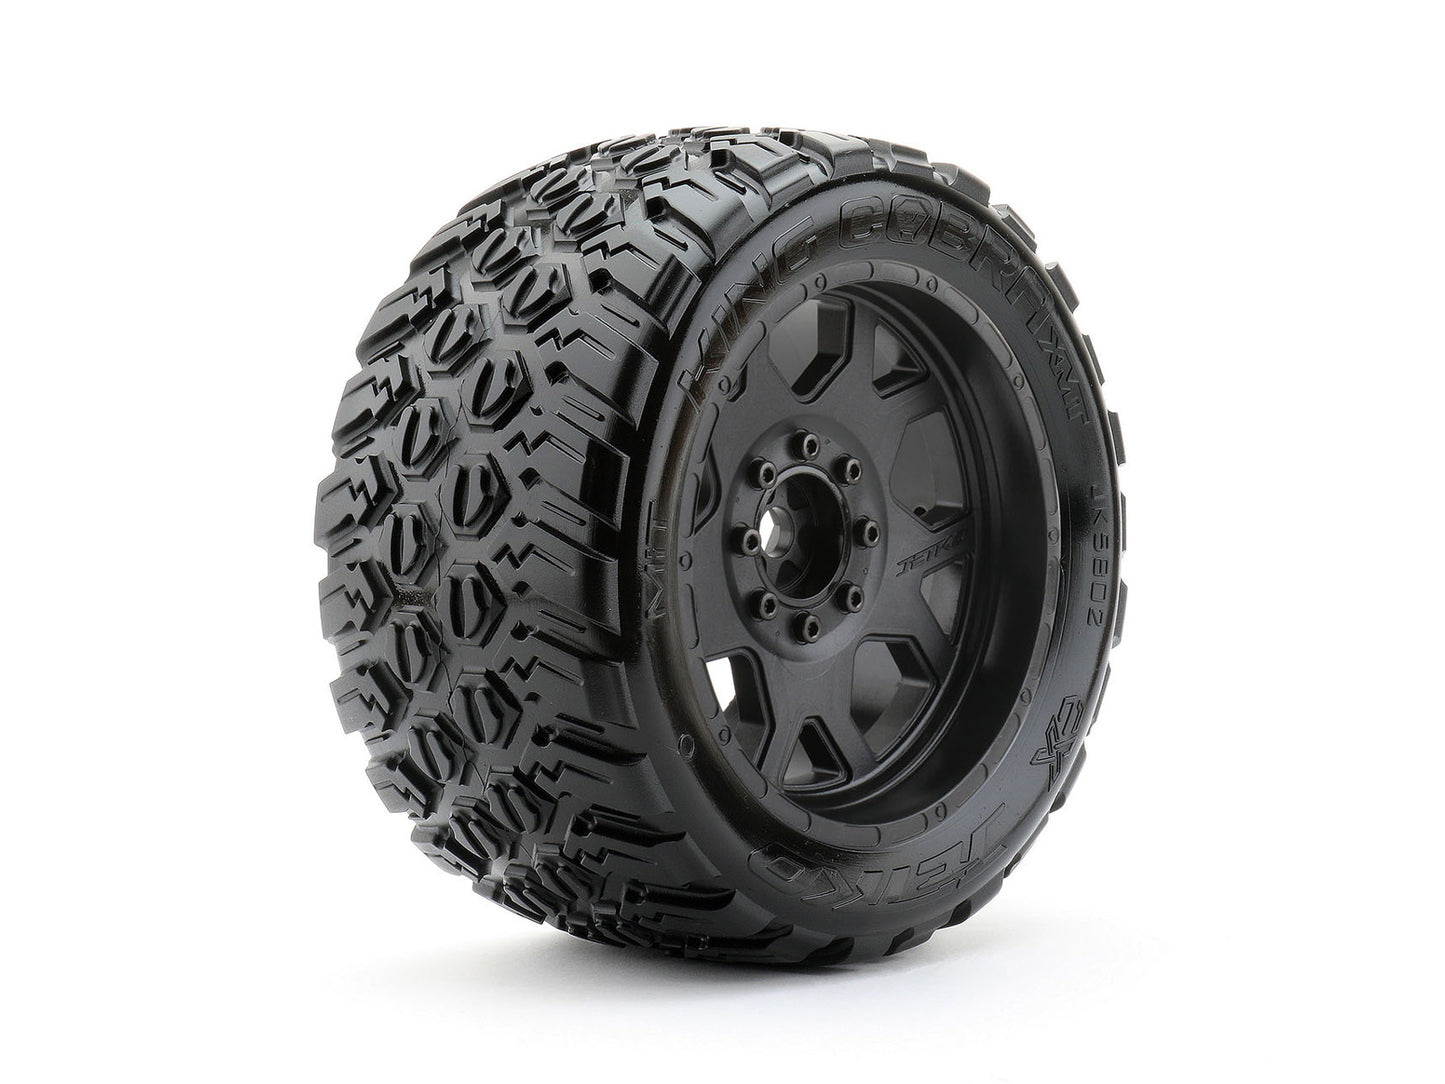 1/5 XMT King Cobra Tires Mounted on Black Claw Rims, Medium Soft, Belted, 24mm